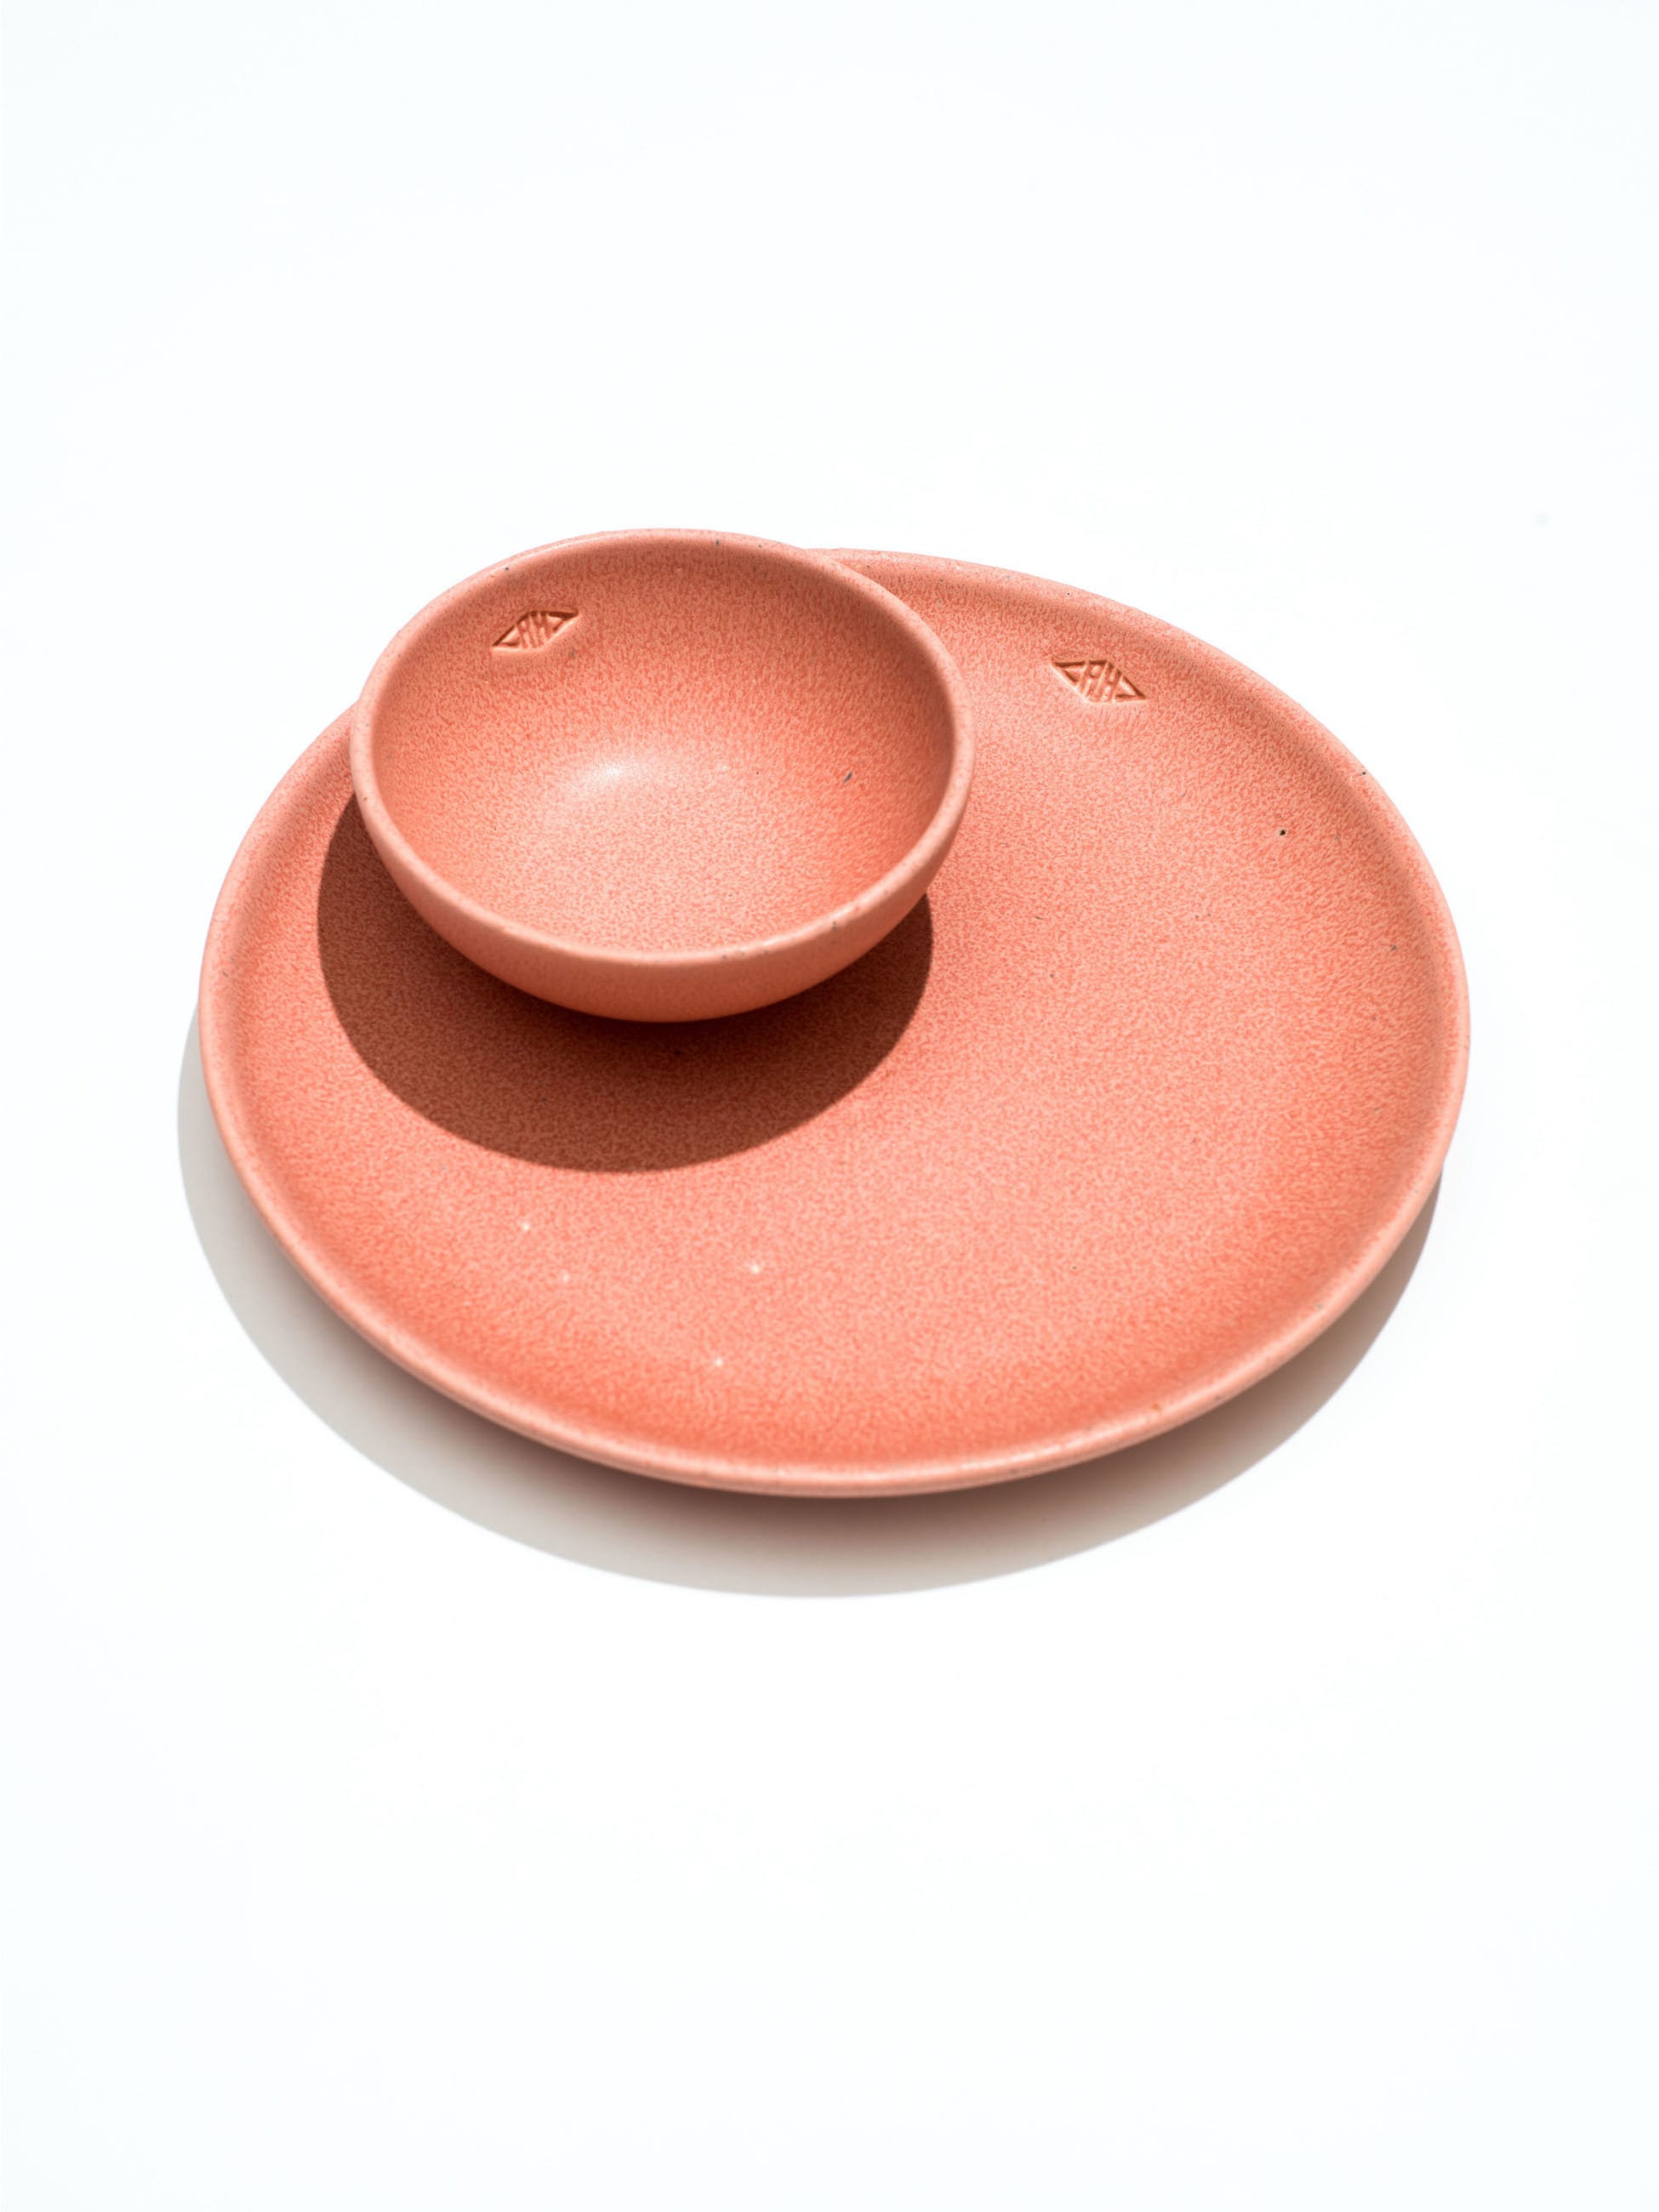 Recycled Clay Dessert Bowl 詳細画像 pink 7